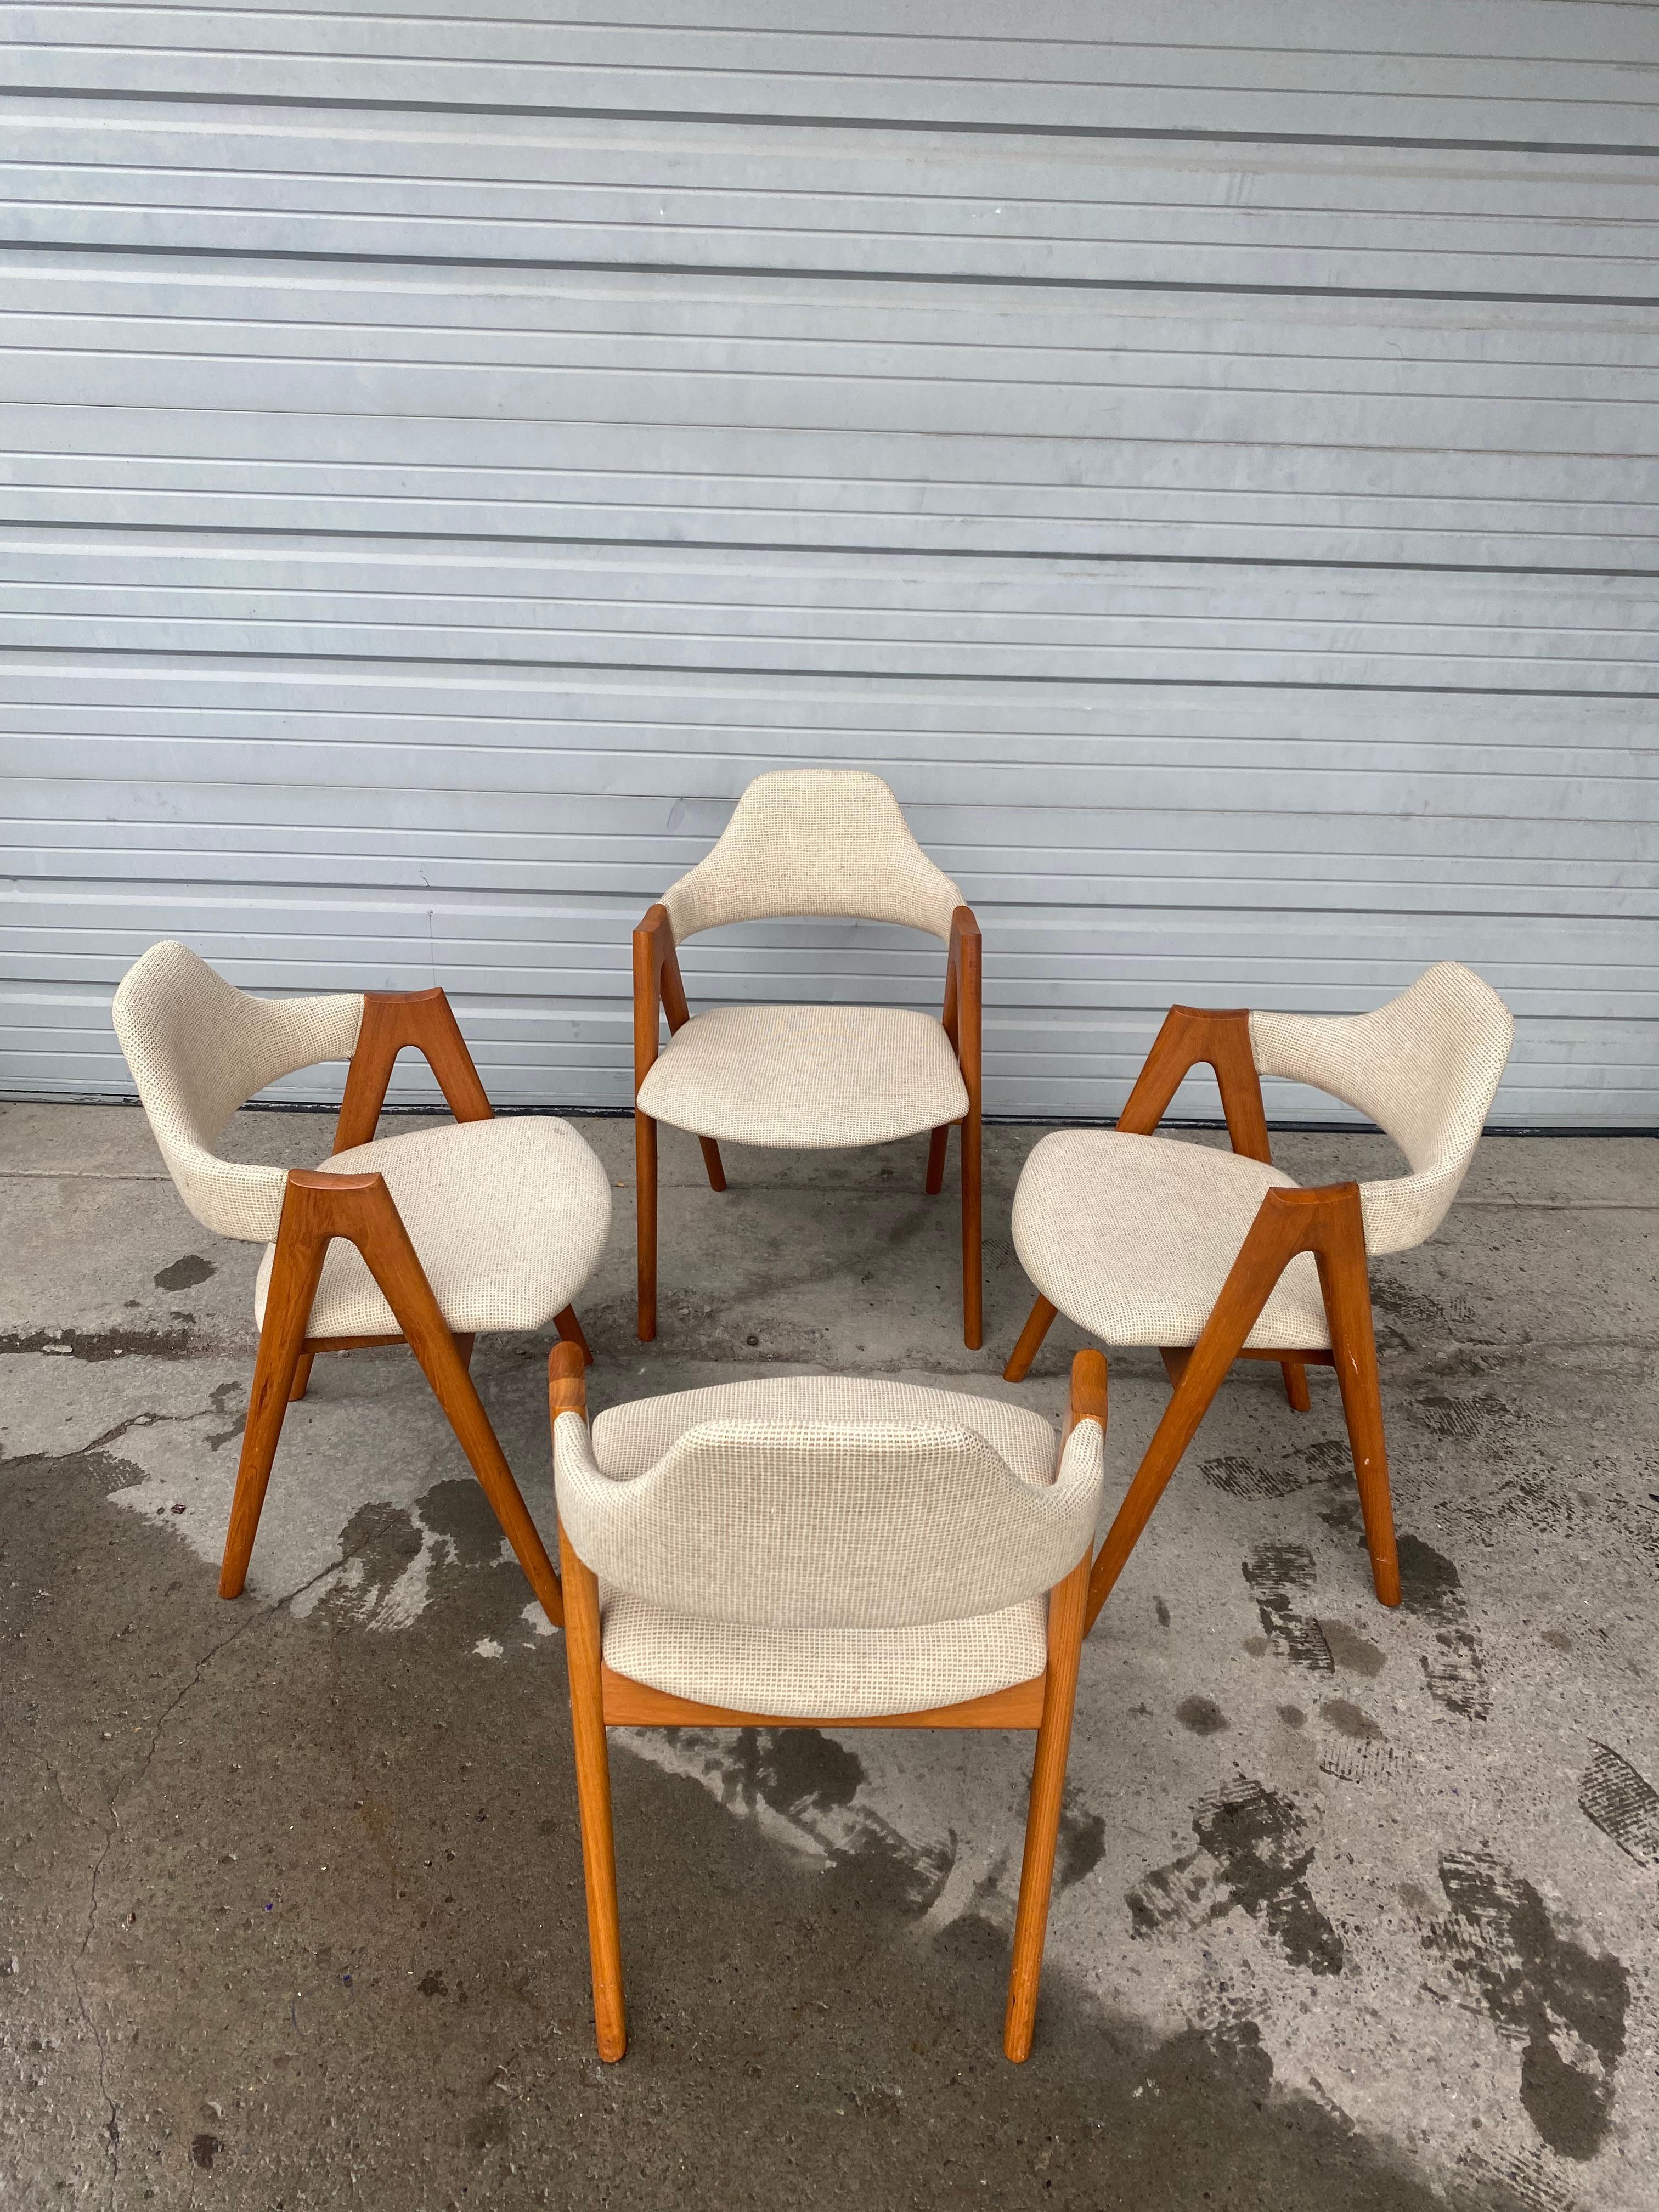 Stunning set of 4 Kai Kritiansen Compass Chairs manufactured by SVA Mobler, Made in Denmark, Superior quality and construction. Amazing design, Retains original fabric as well as original finish / patina. Very comfortable, super stylish. Hand